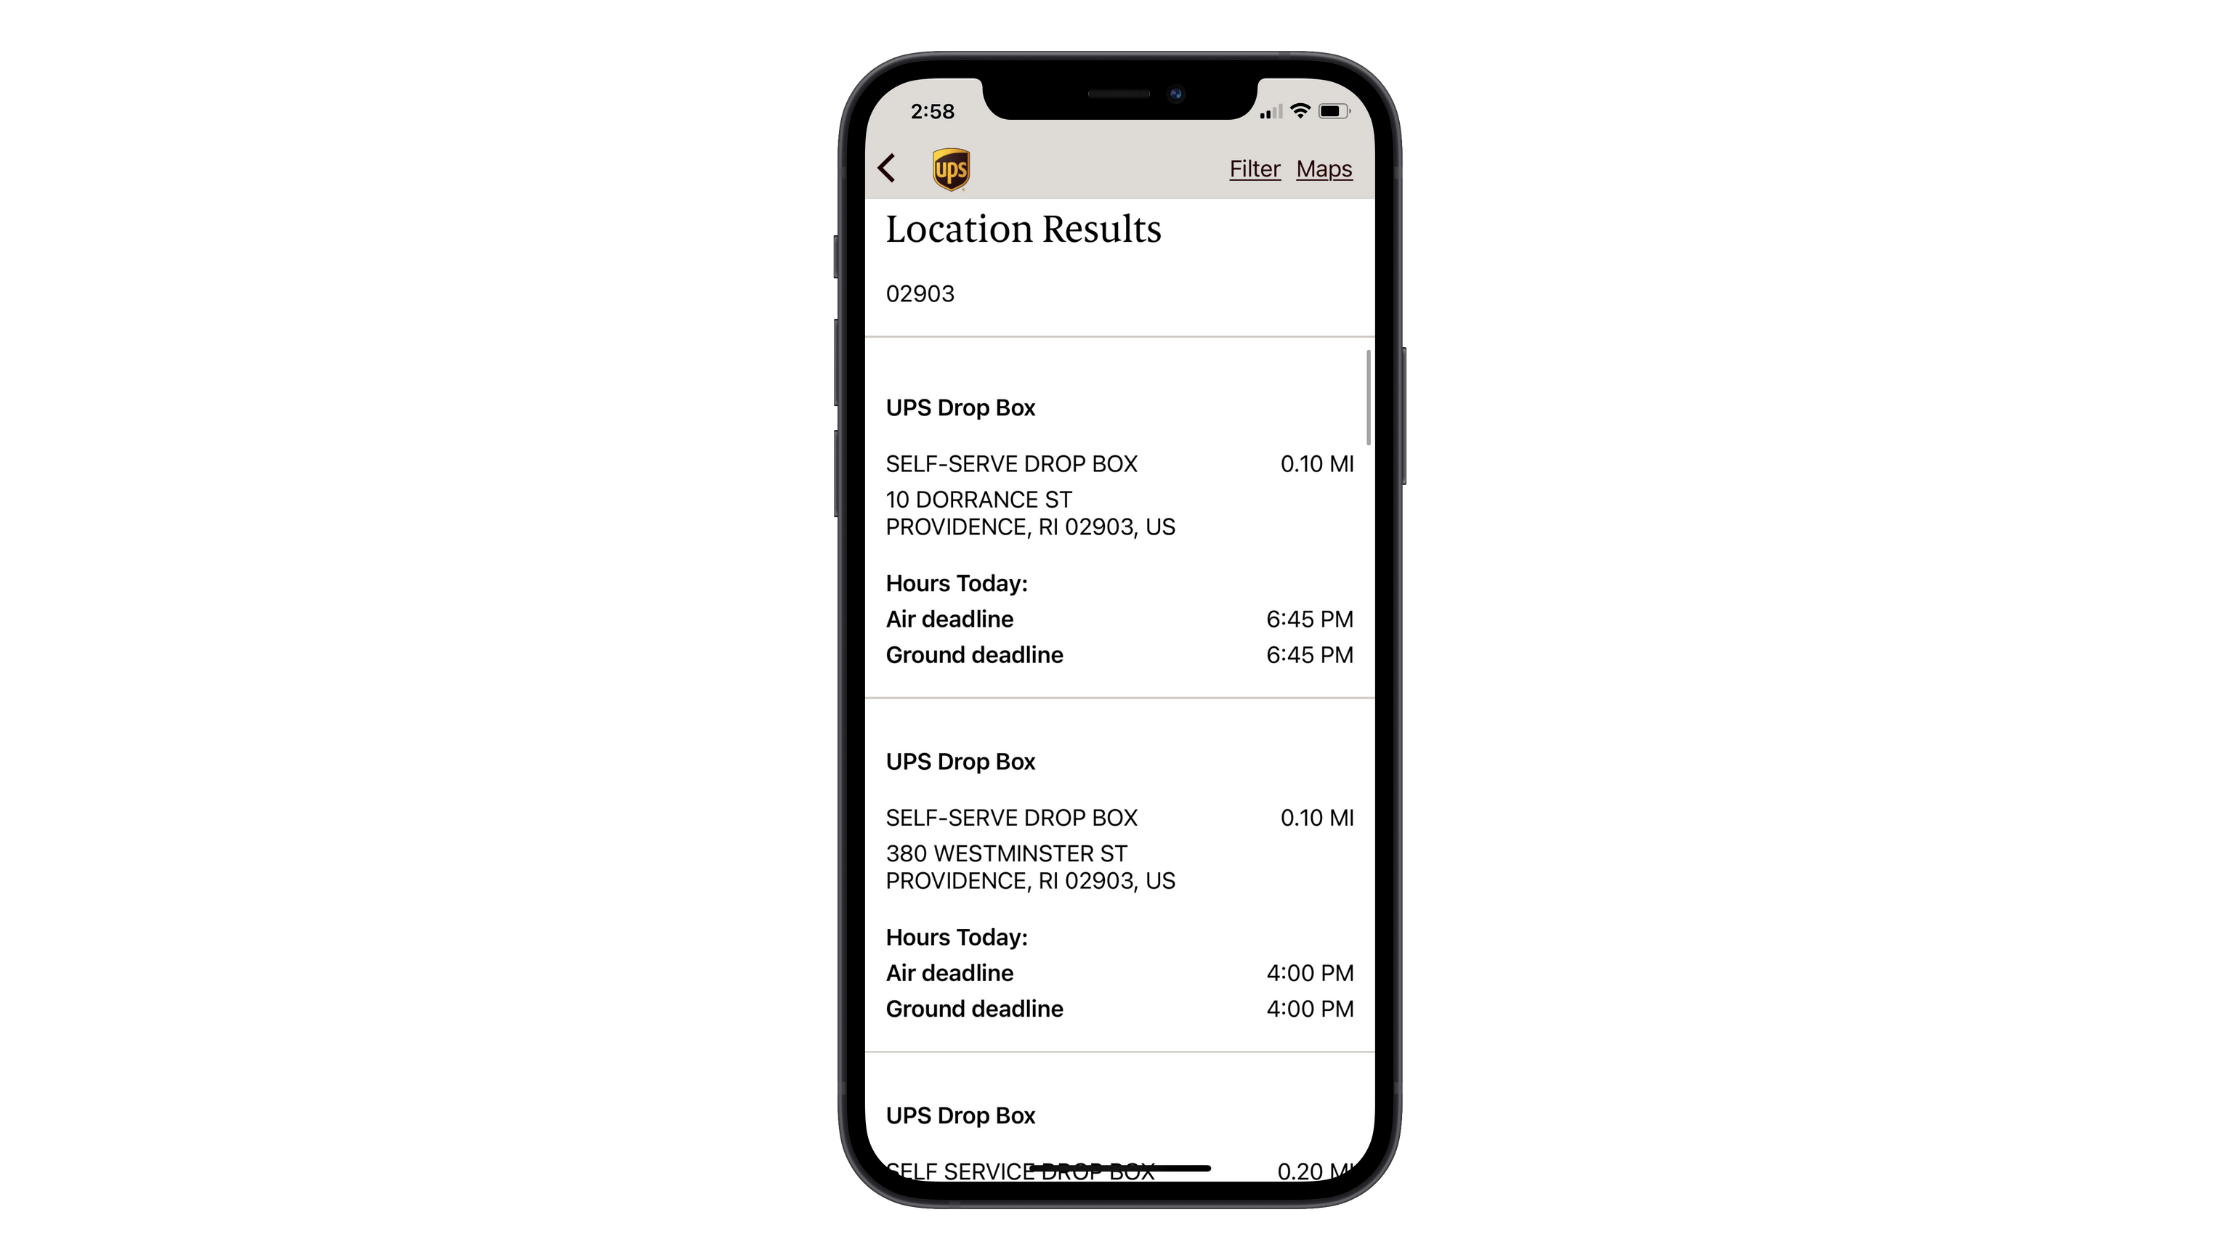 A search for UPS locations near zip code 02903 in the mobile app yields results for UPS drop box locations on 10 Dorrance St and 380 Westminster St in Providence, RI.